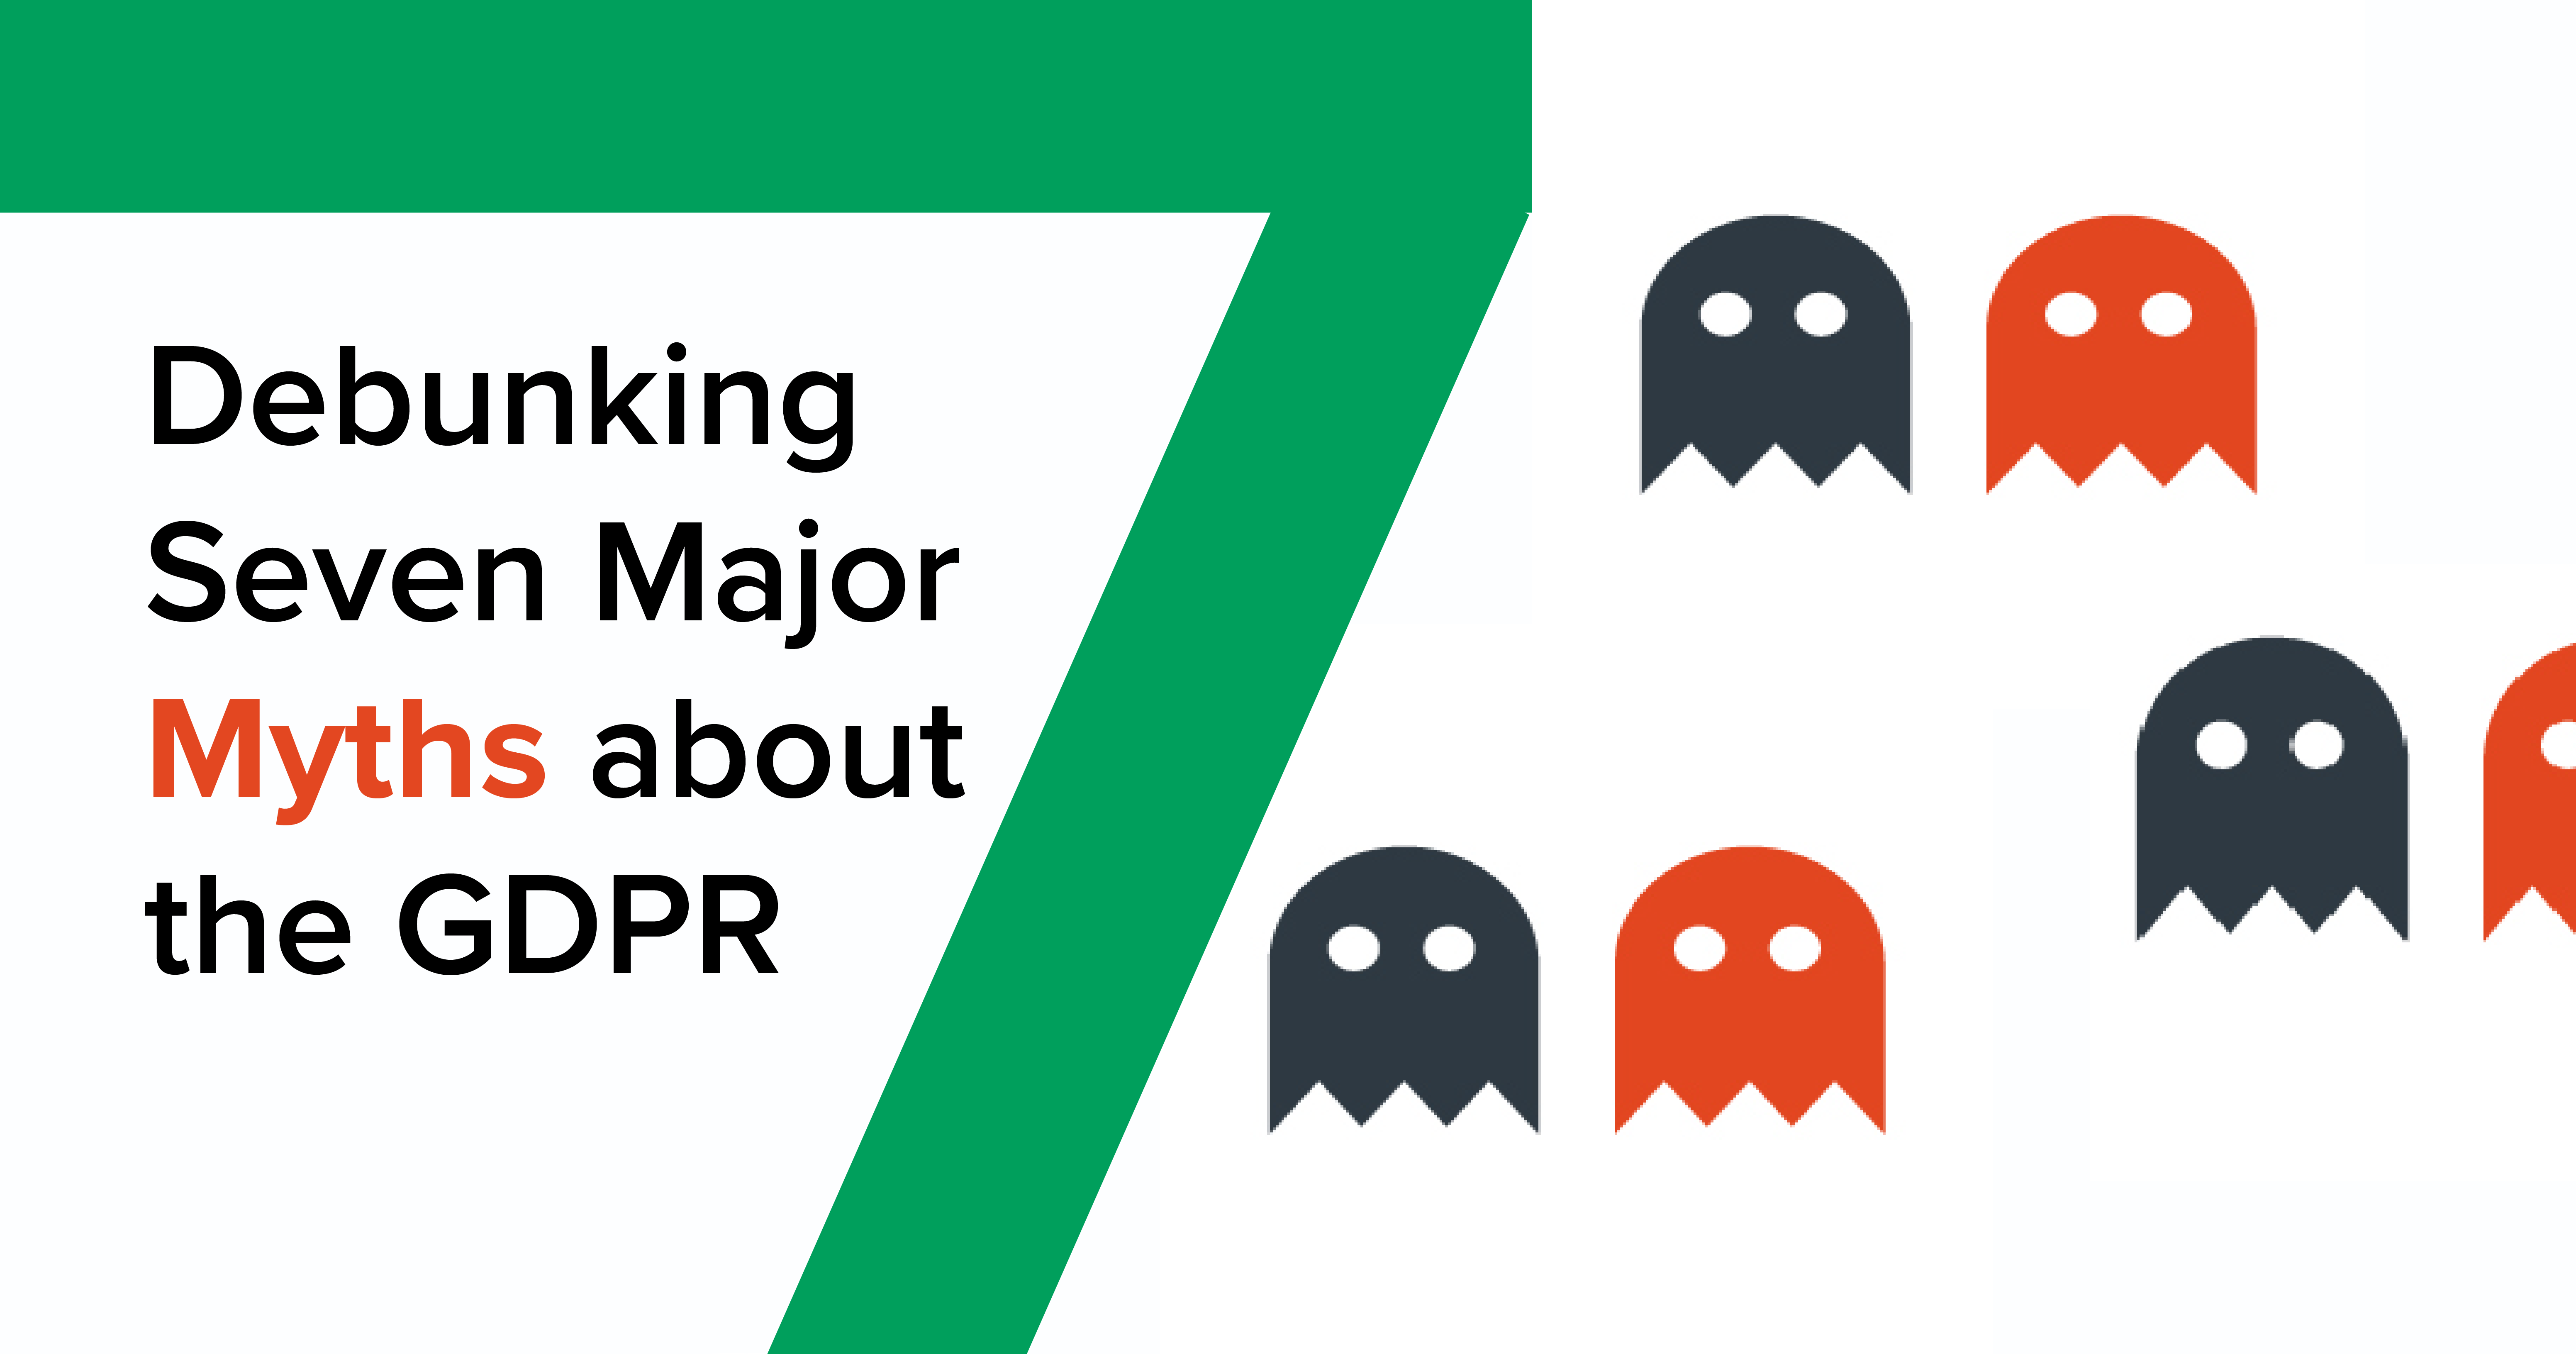 Debunking Seven Major Myths about the GDPR